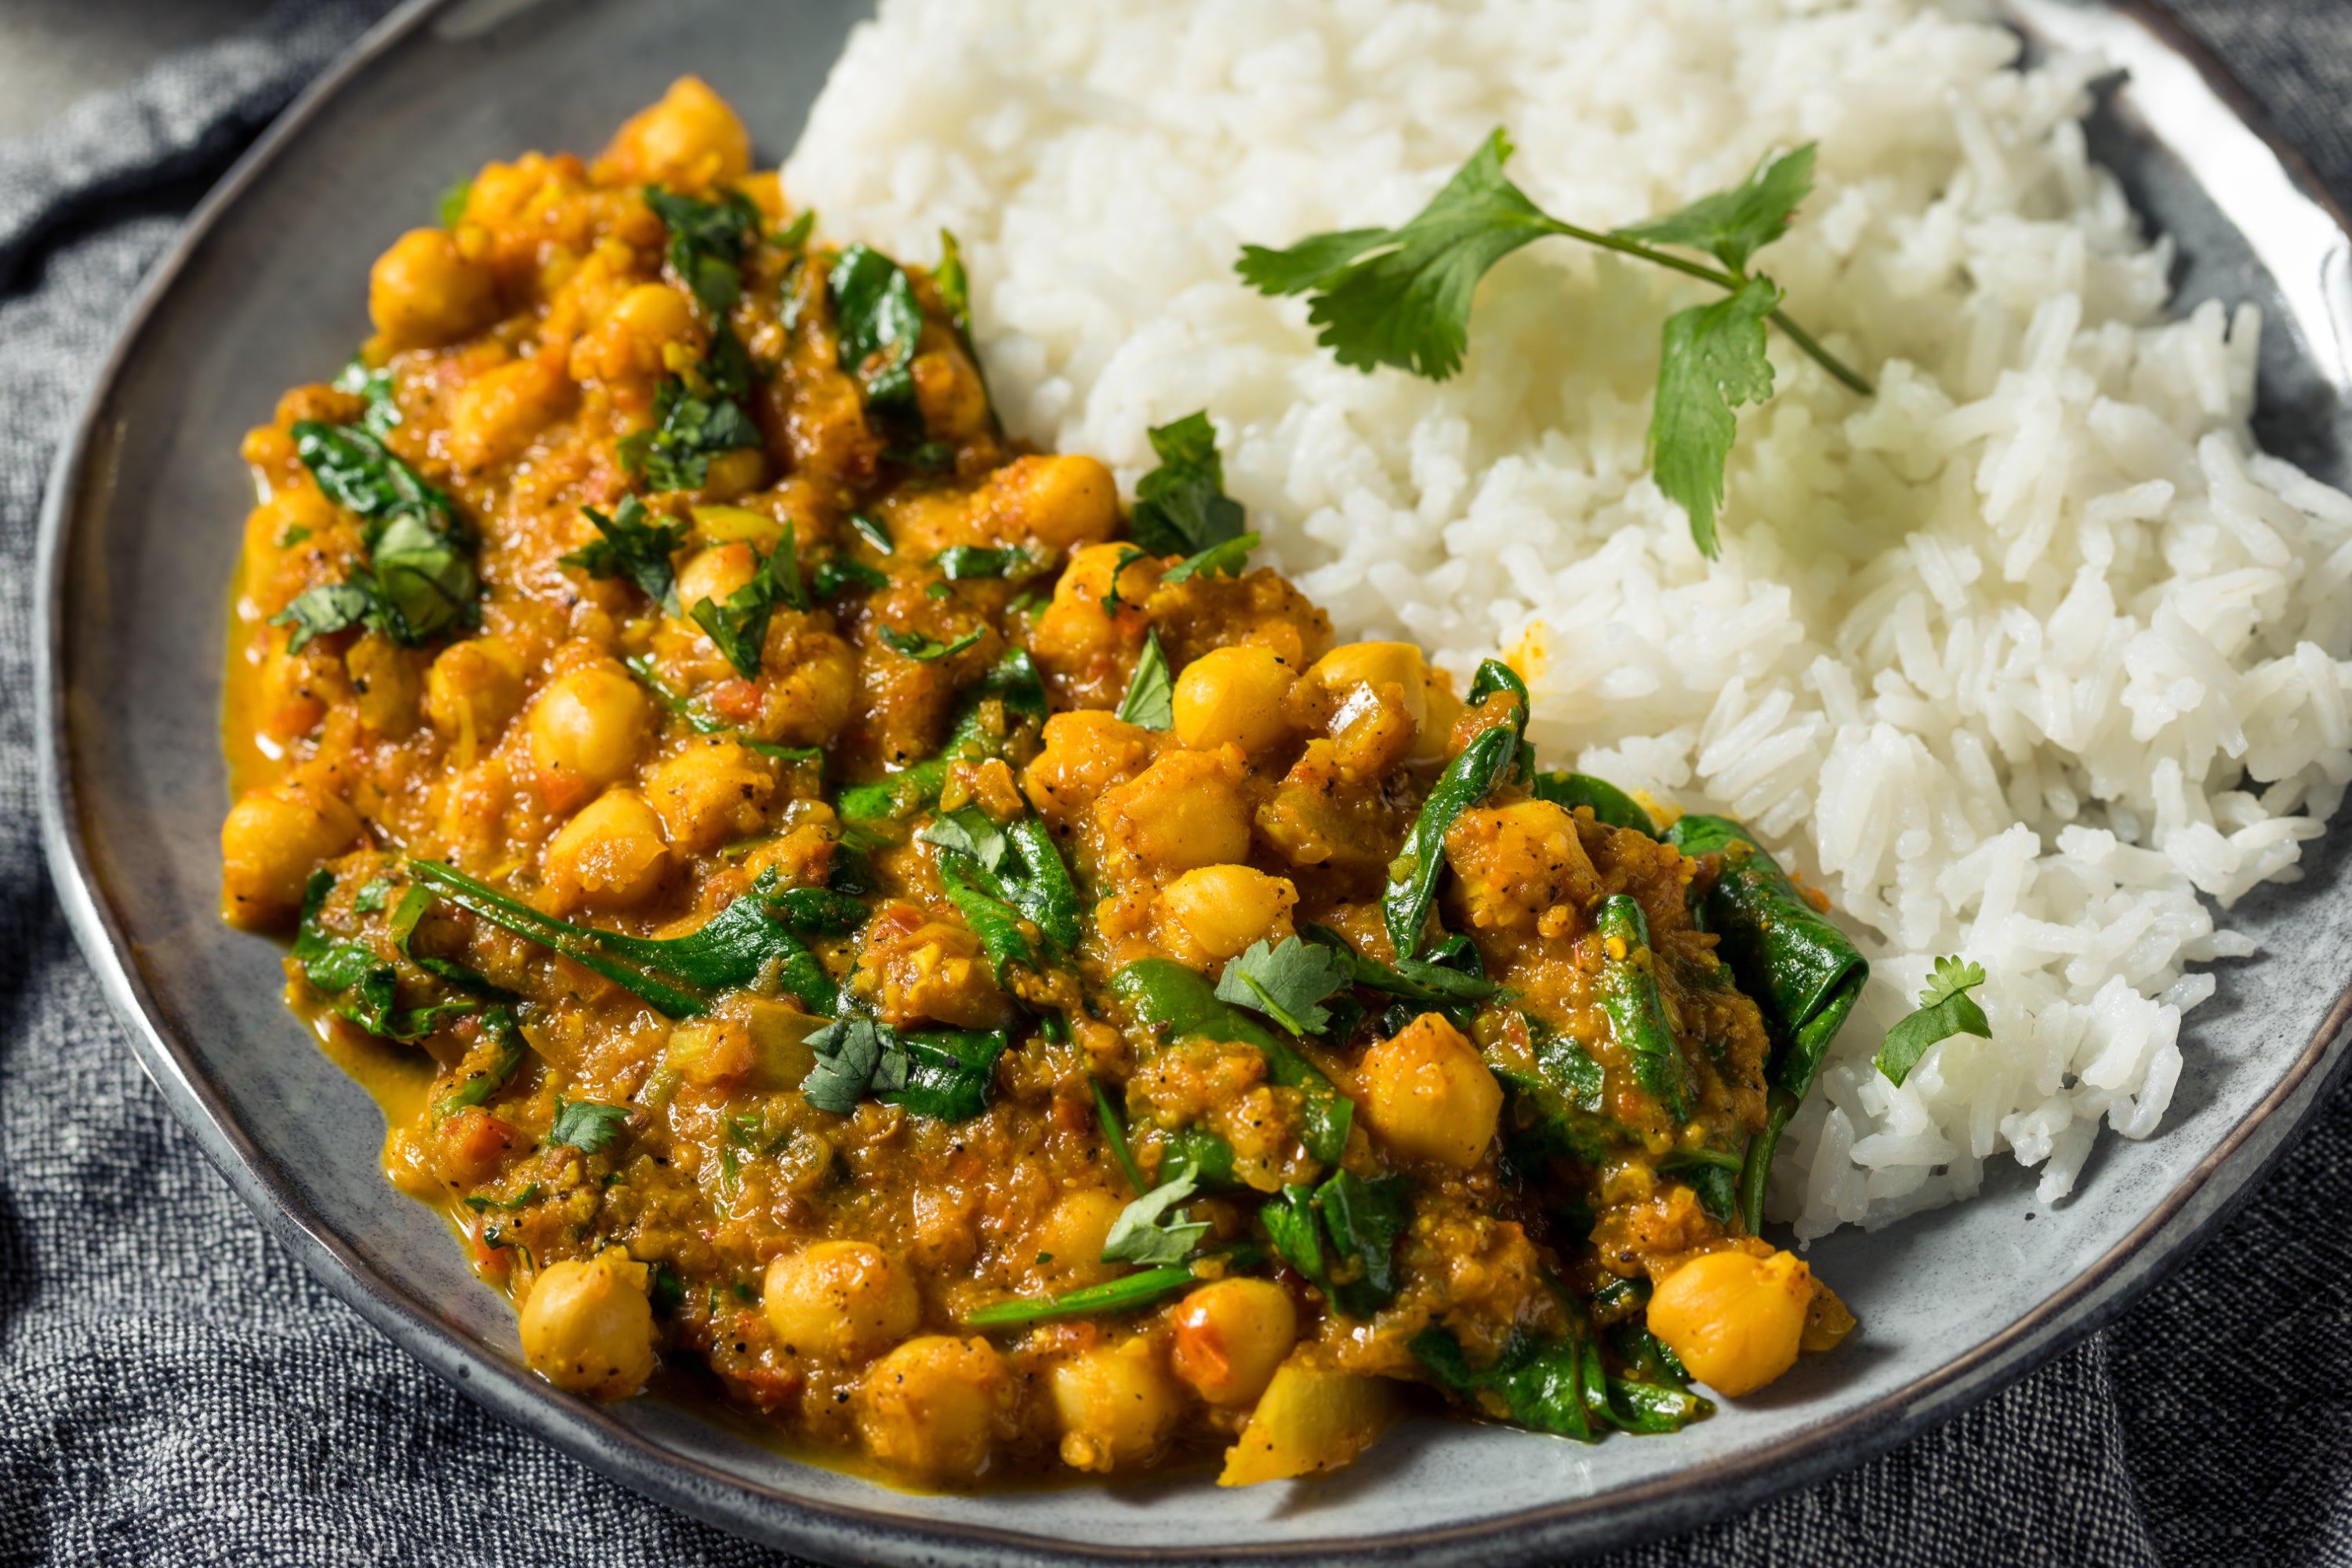 Tomato, Chickpea and Spinach Curry | Dukes Weight Loss